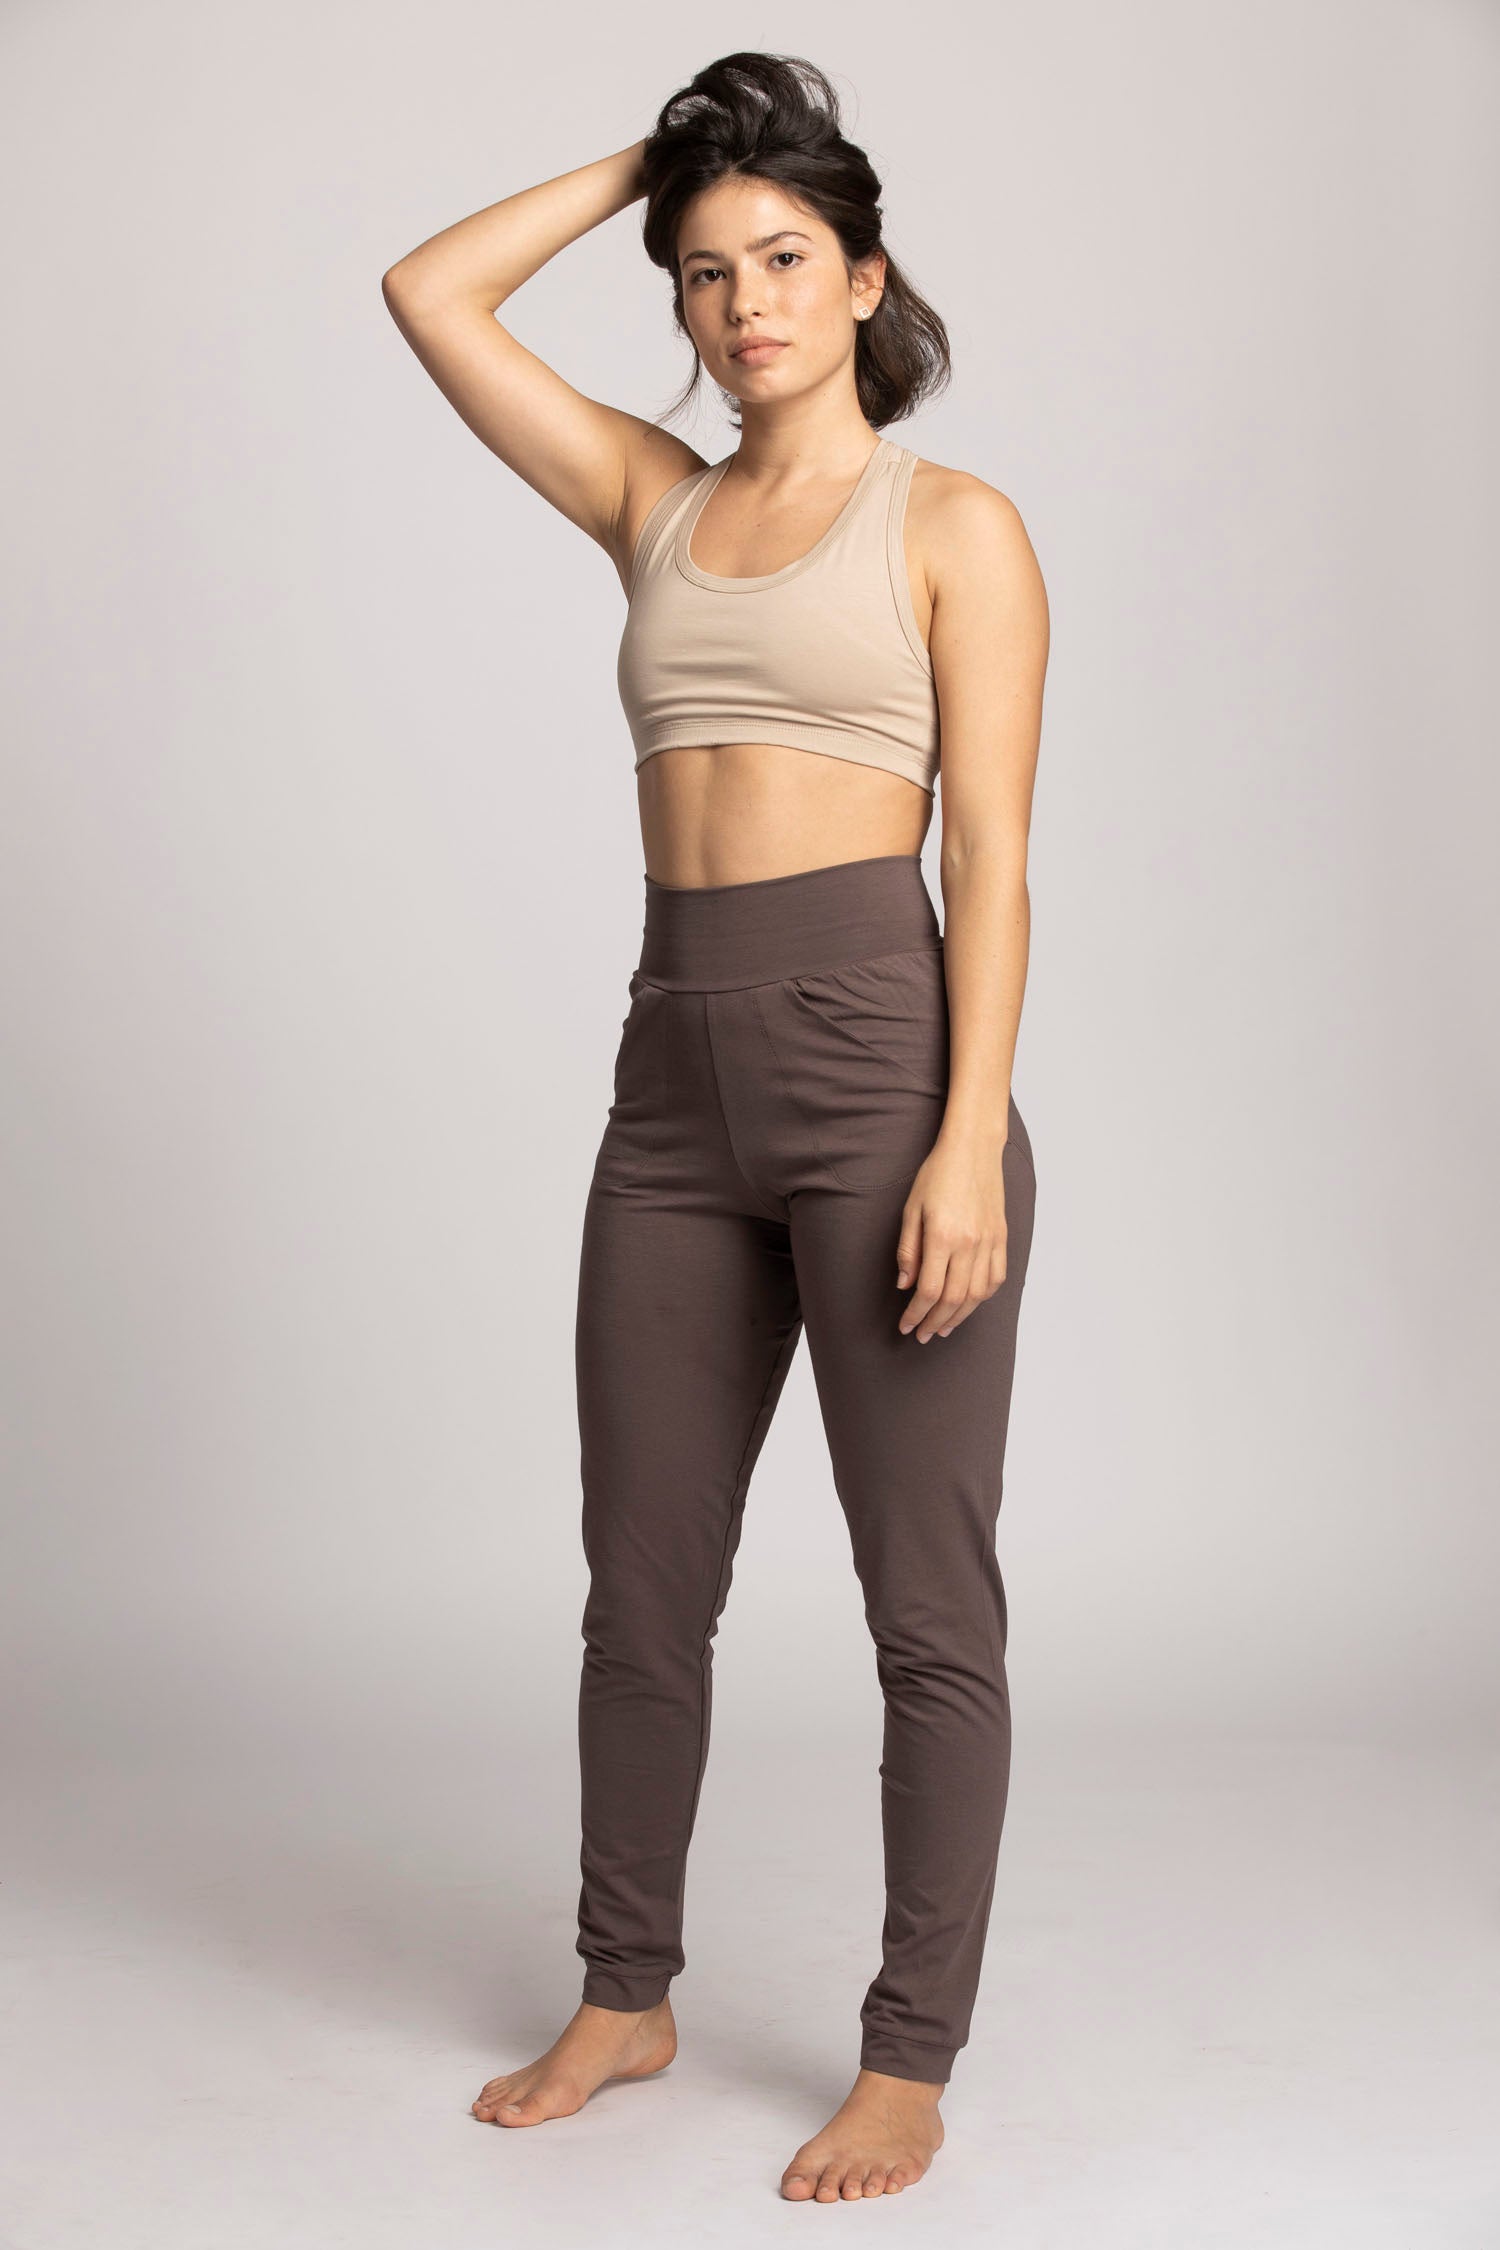 Yoga clothing and footwear